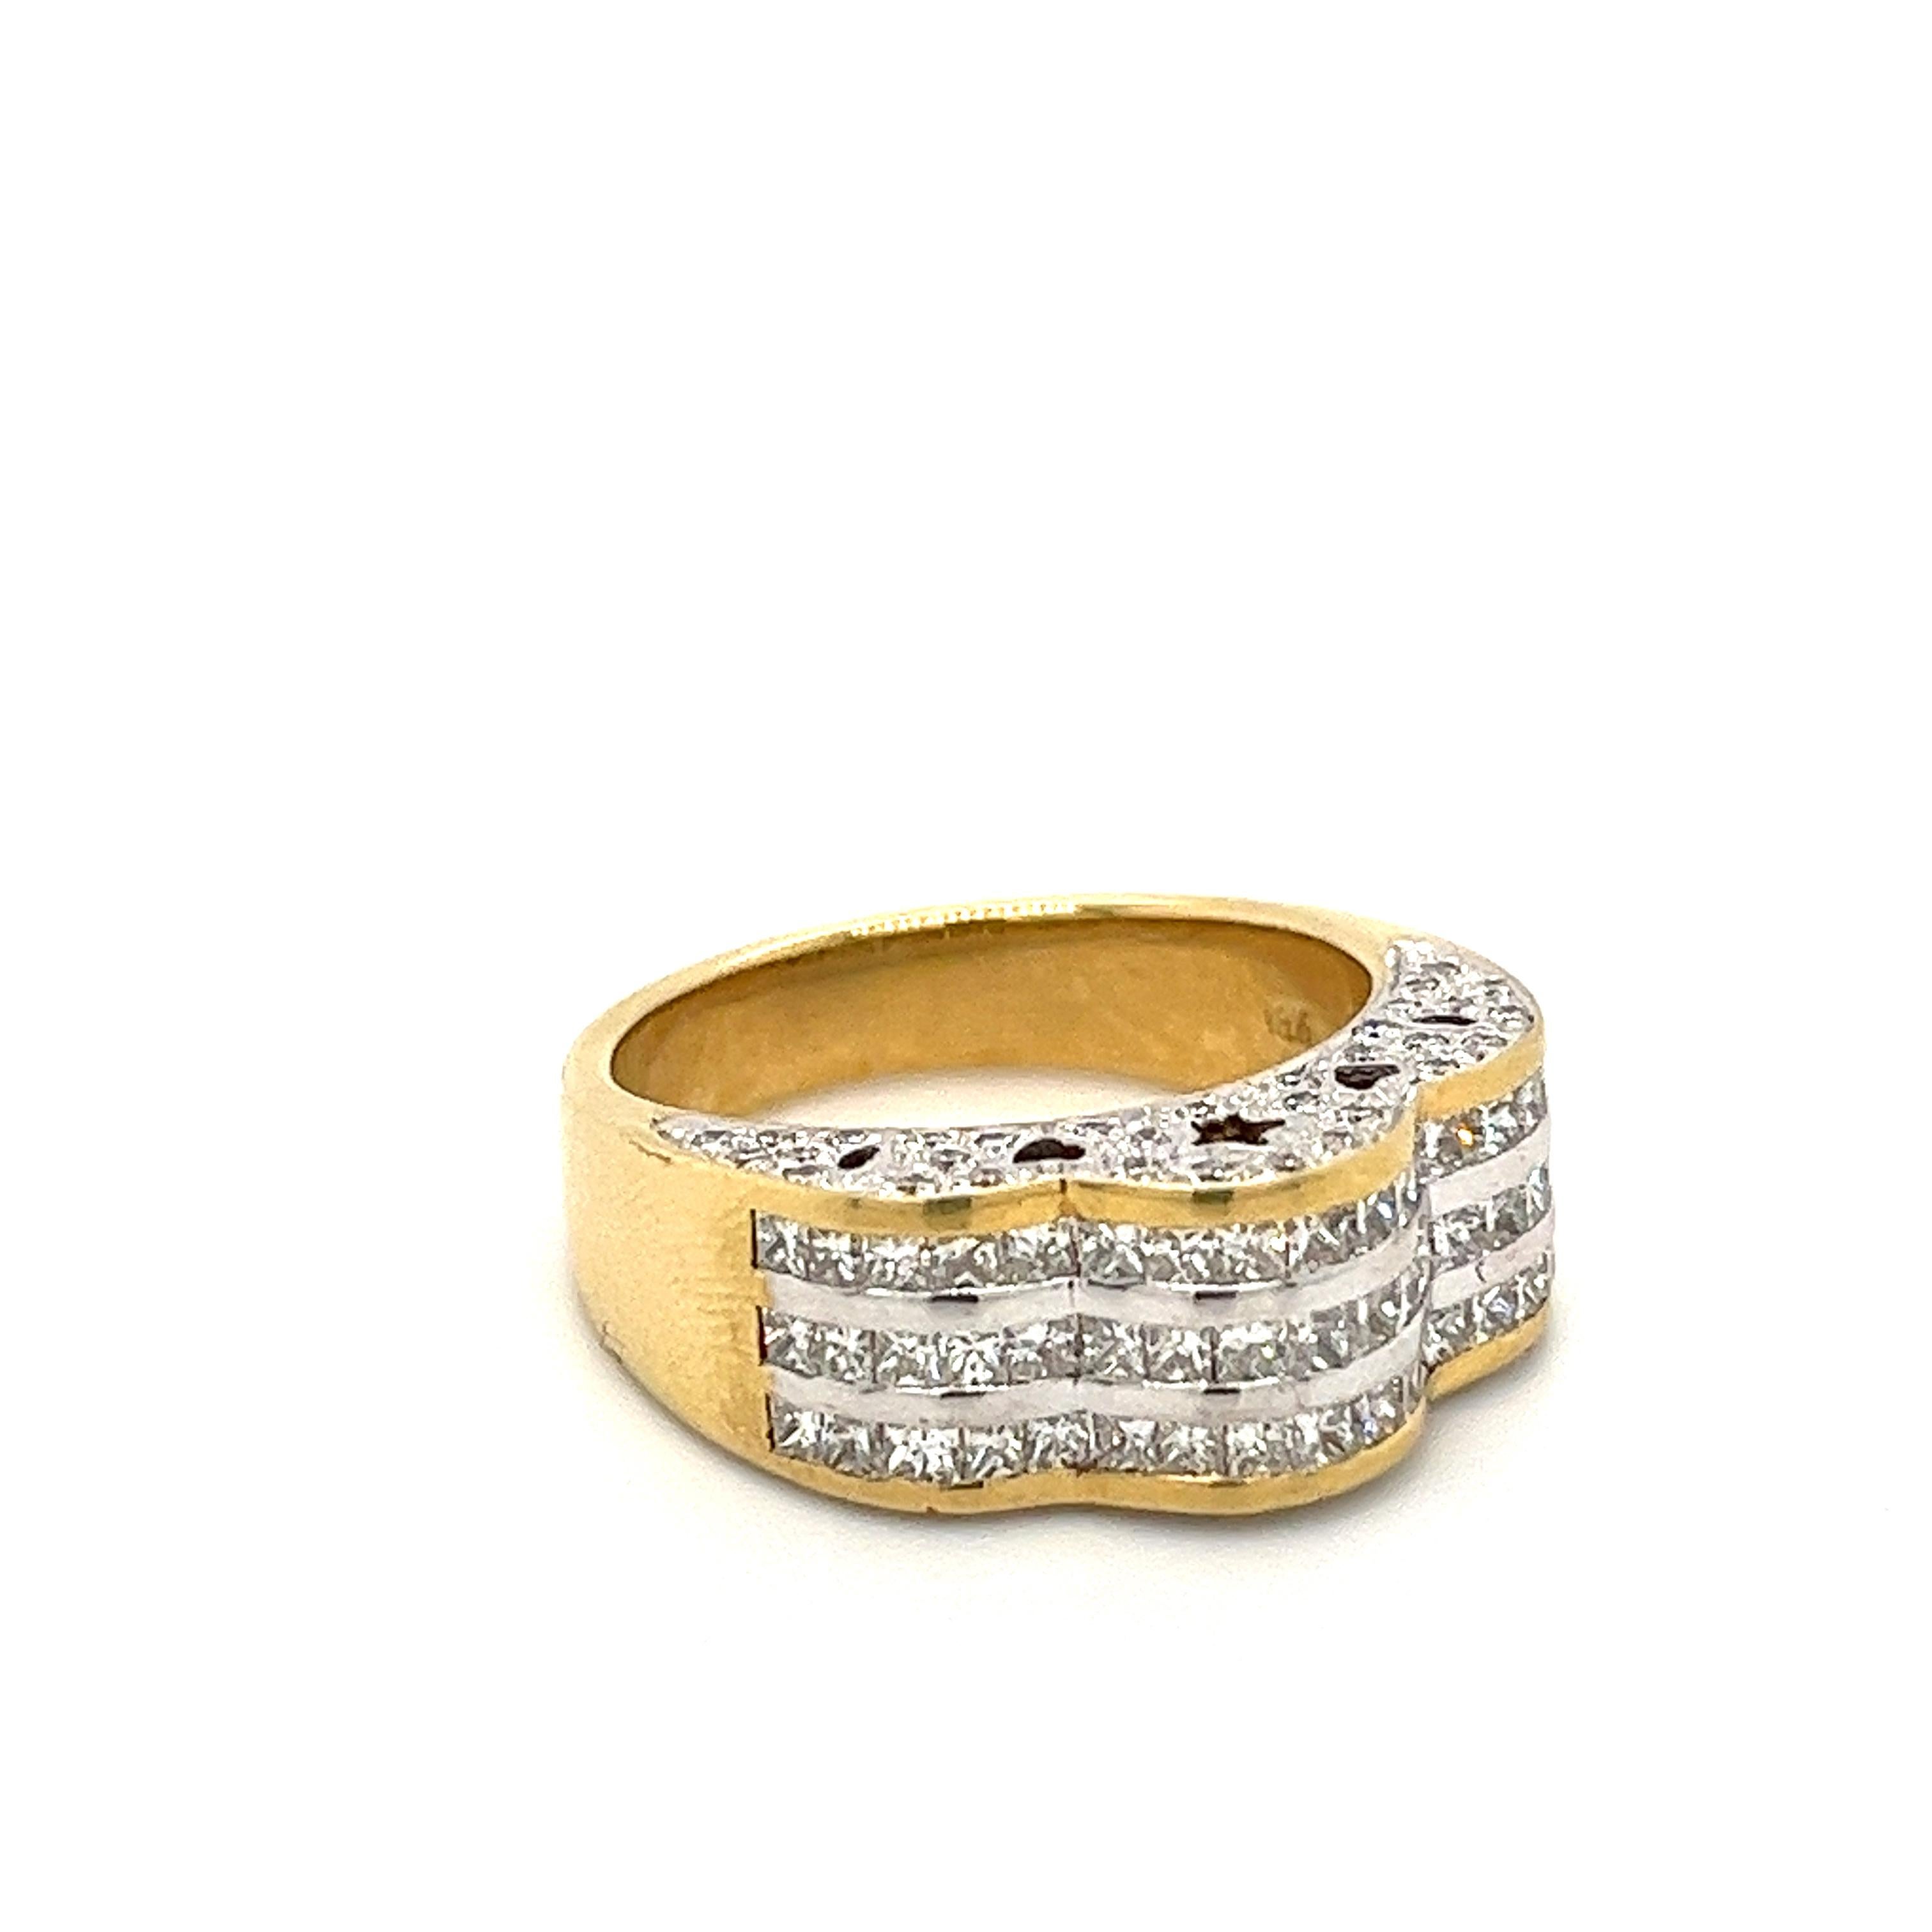 18K yellow gold ring set with 1.25 carats in princess and round cut natural diamonds. The princess cut diamonds are channel tension set, with a protective double-sided bezel for additional stability and sturdiness. 

The ring shank is beautifully